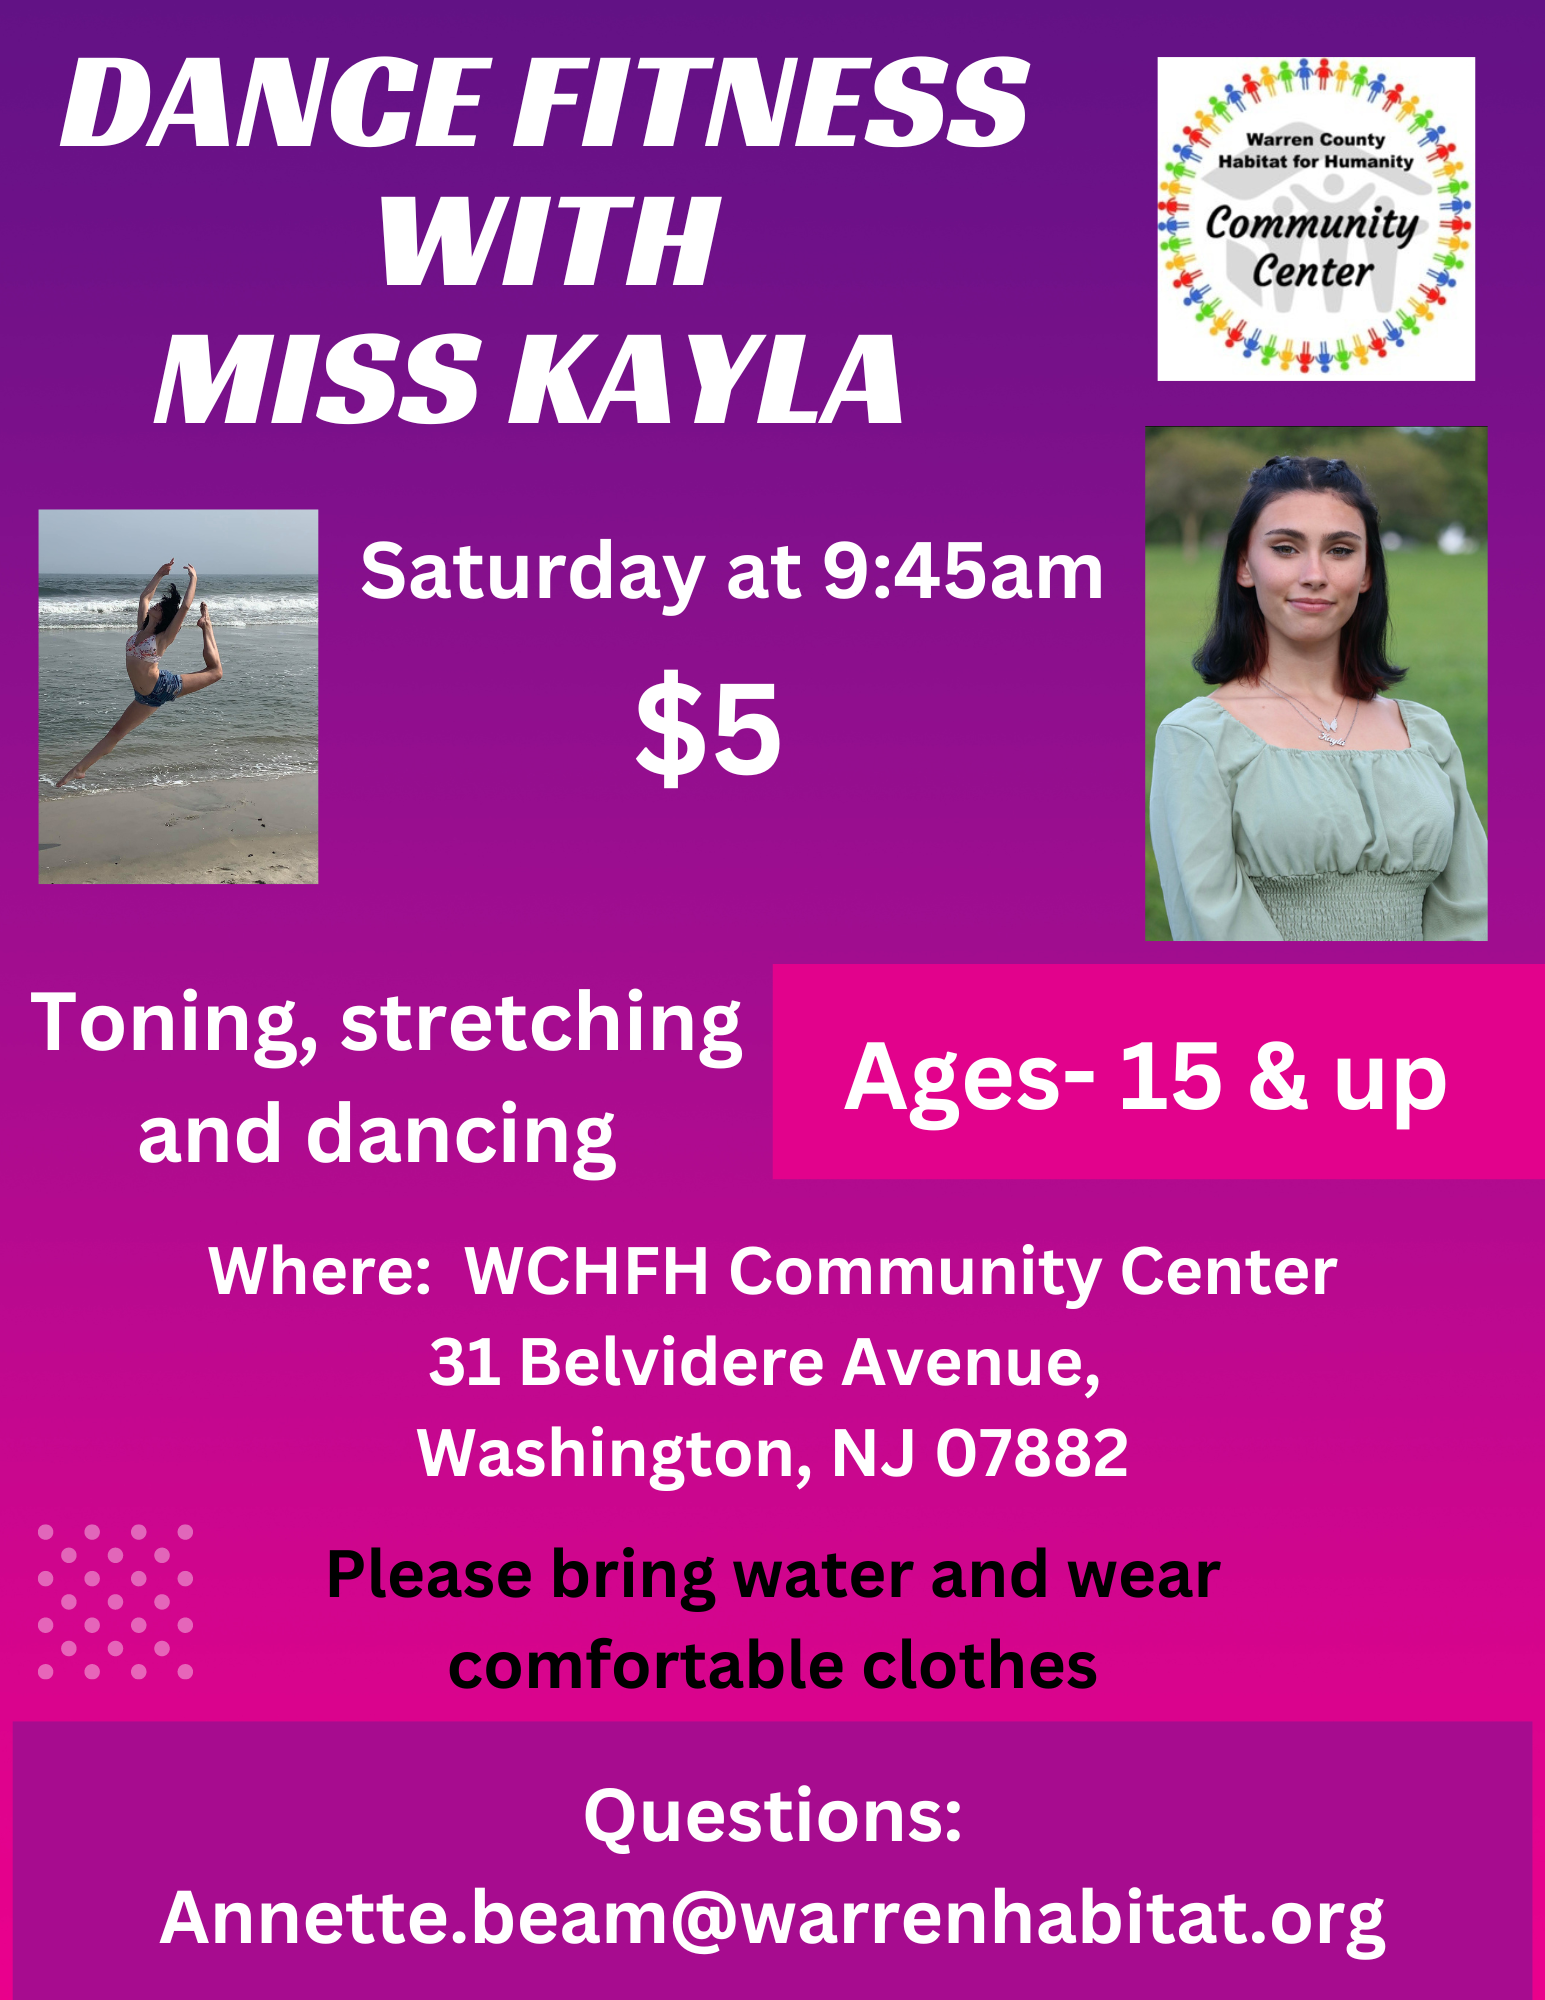 Dance Fitness with Miss Kayla  Warren County Habitat for Humanity